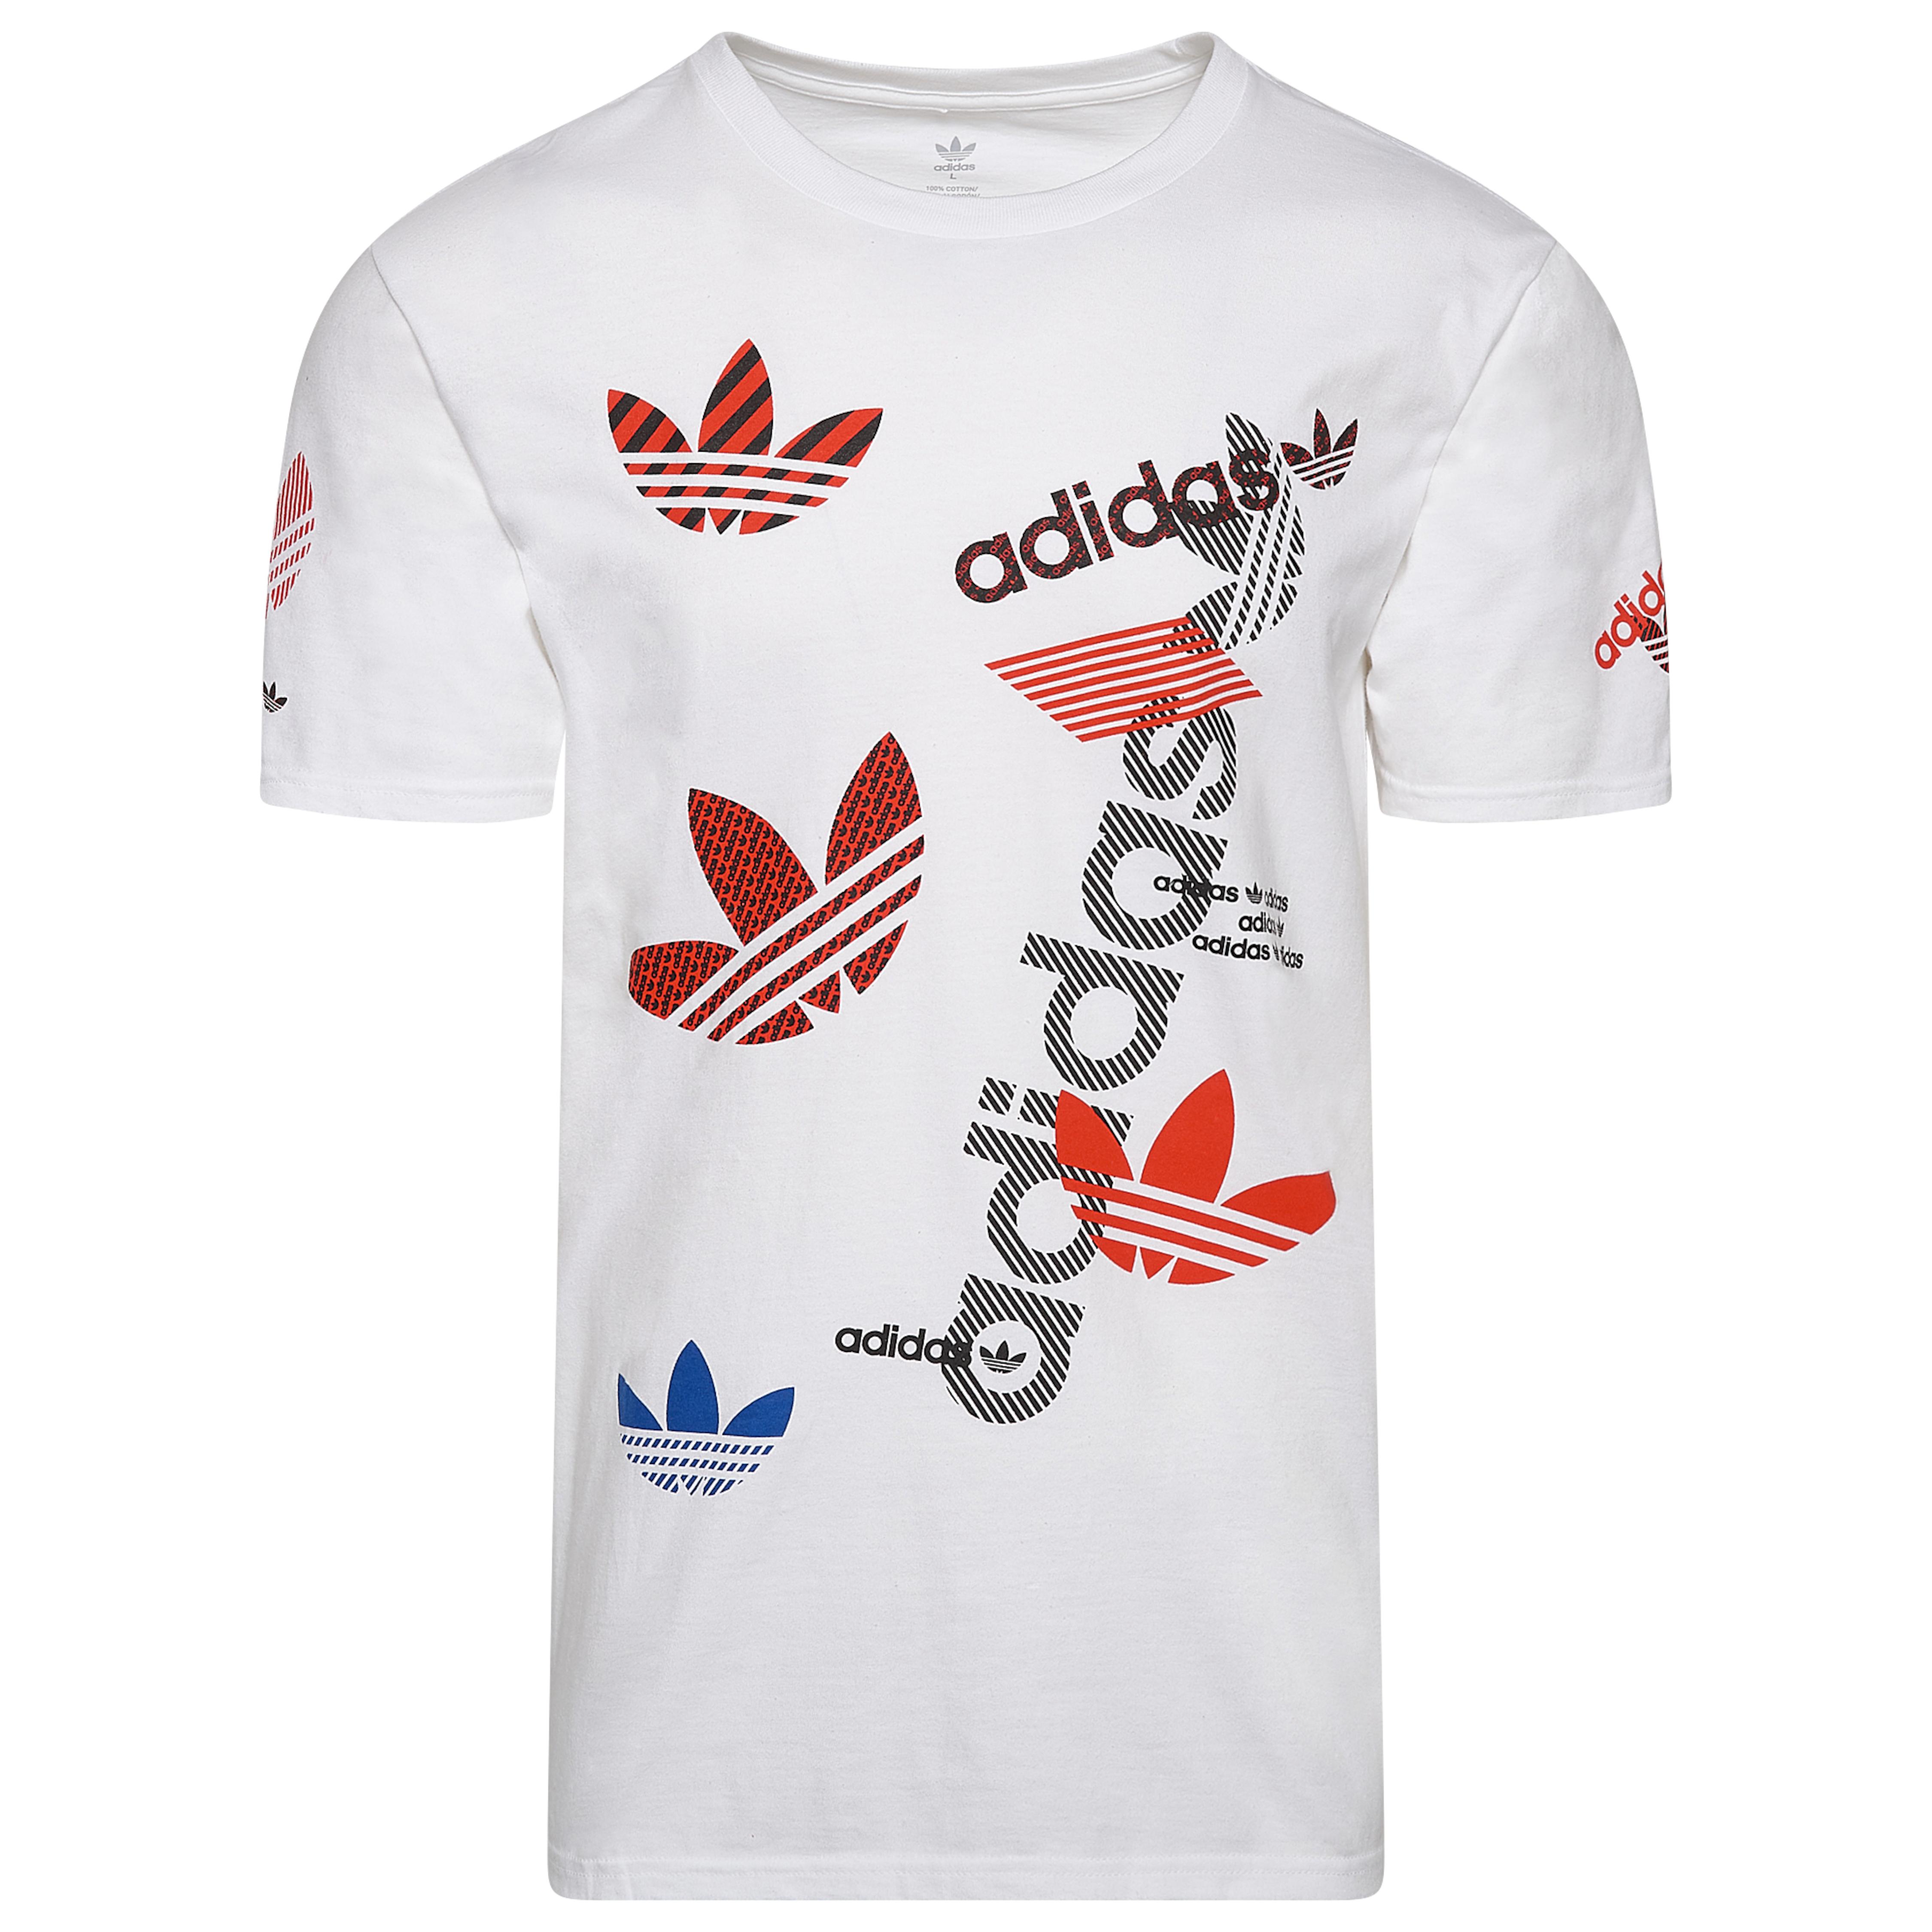 adidas Cotton Logo Distortion T-shirt in White/Red/Black (White) for -